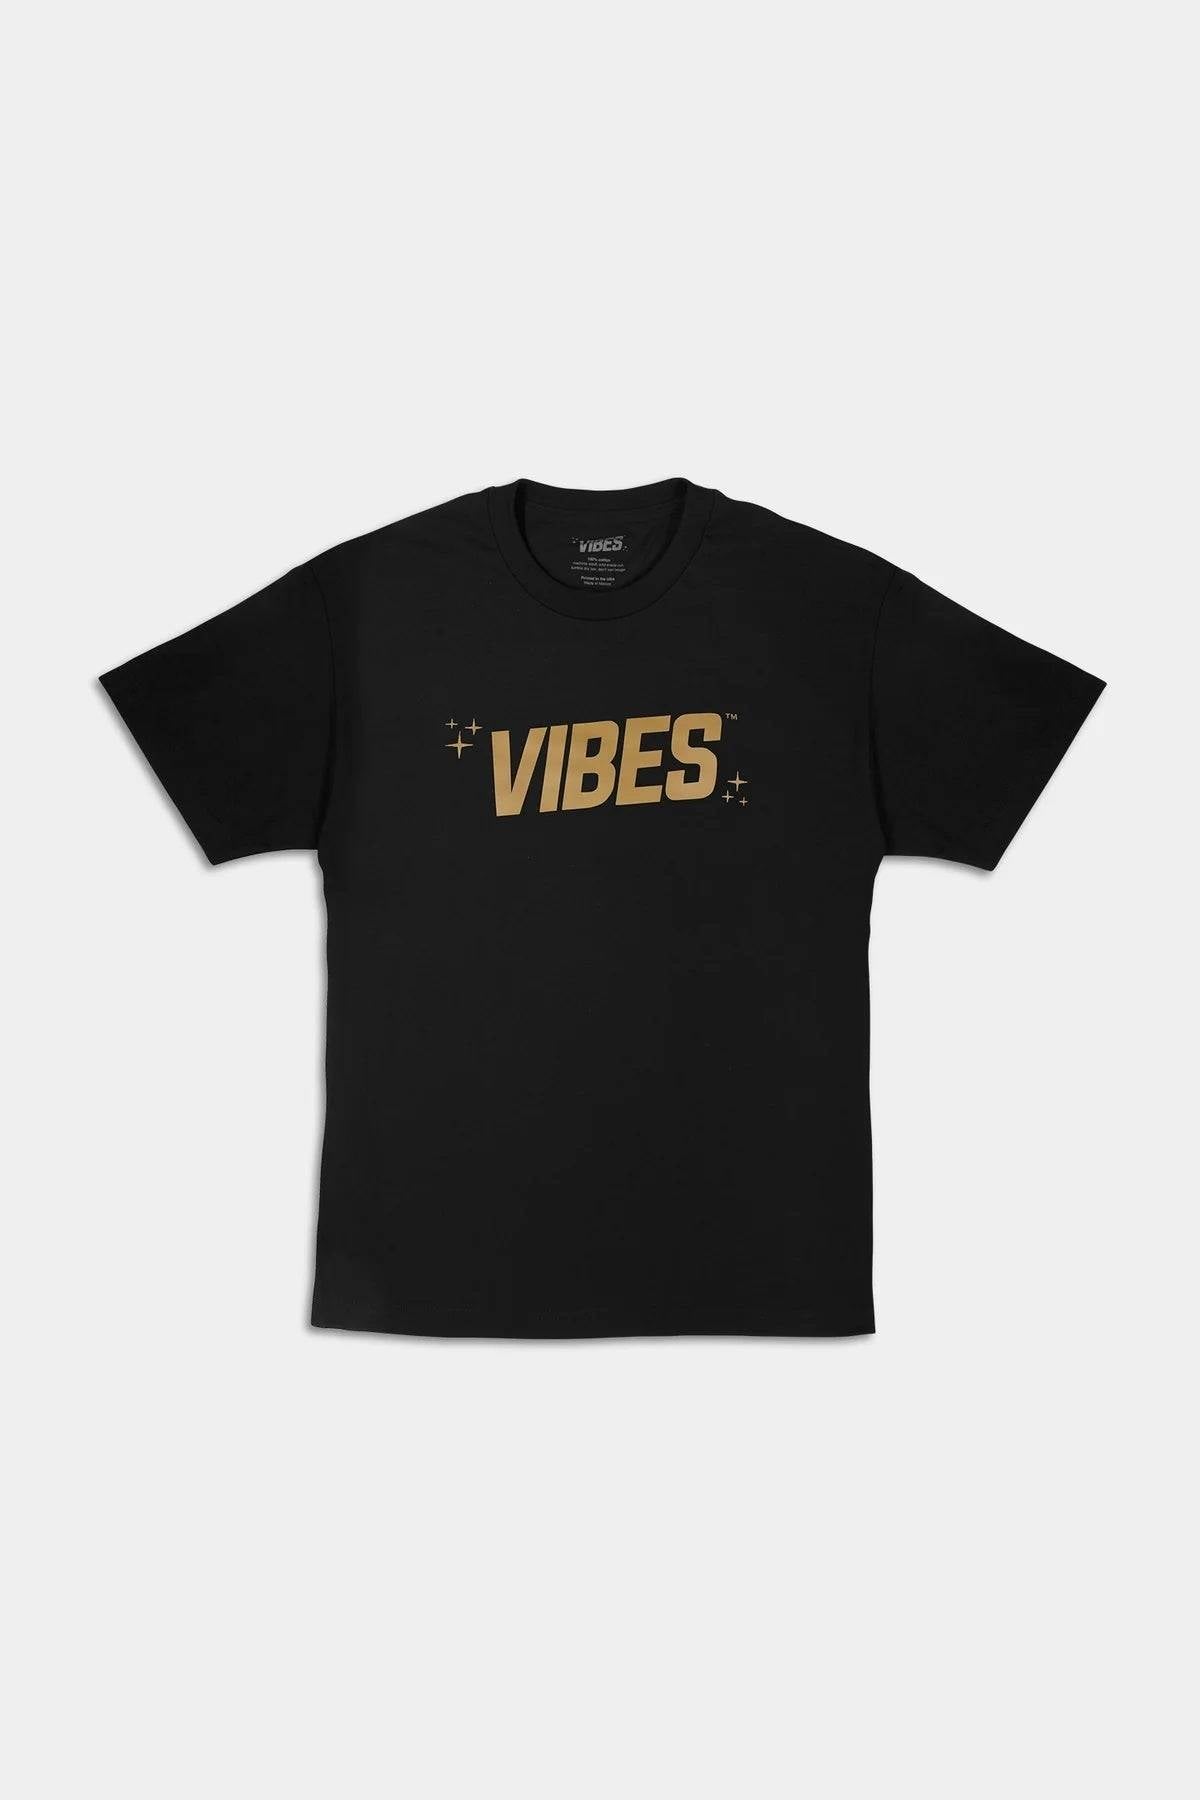 VIBES Black With Gold Logo T-Shirt X-Large